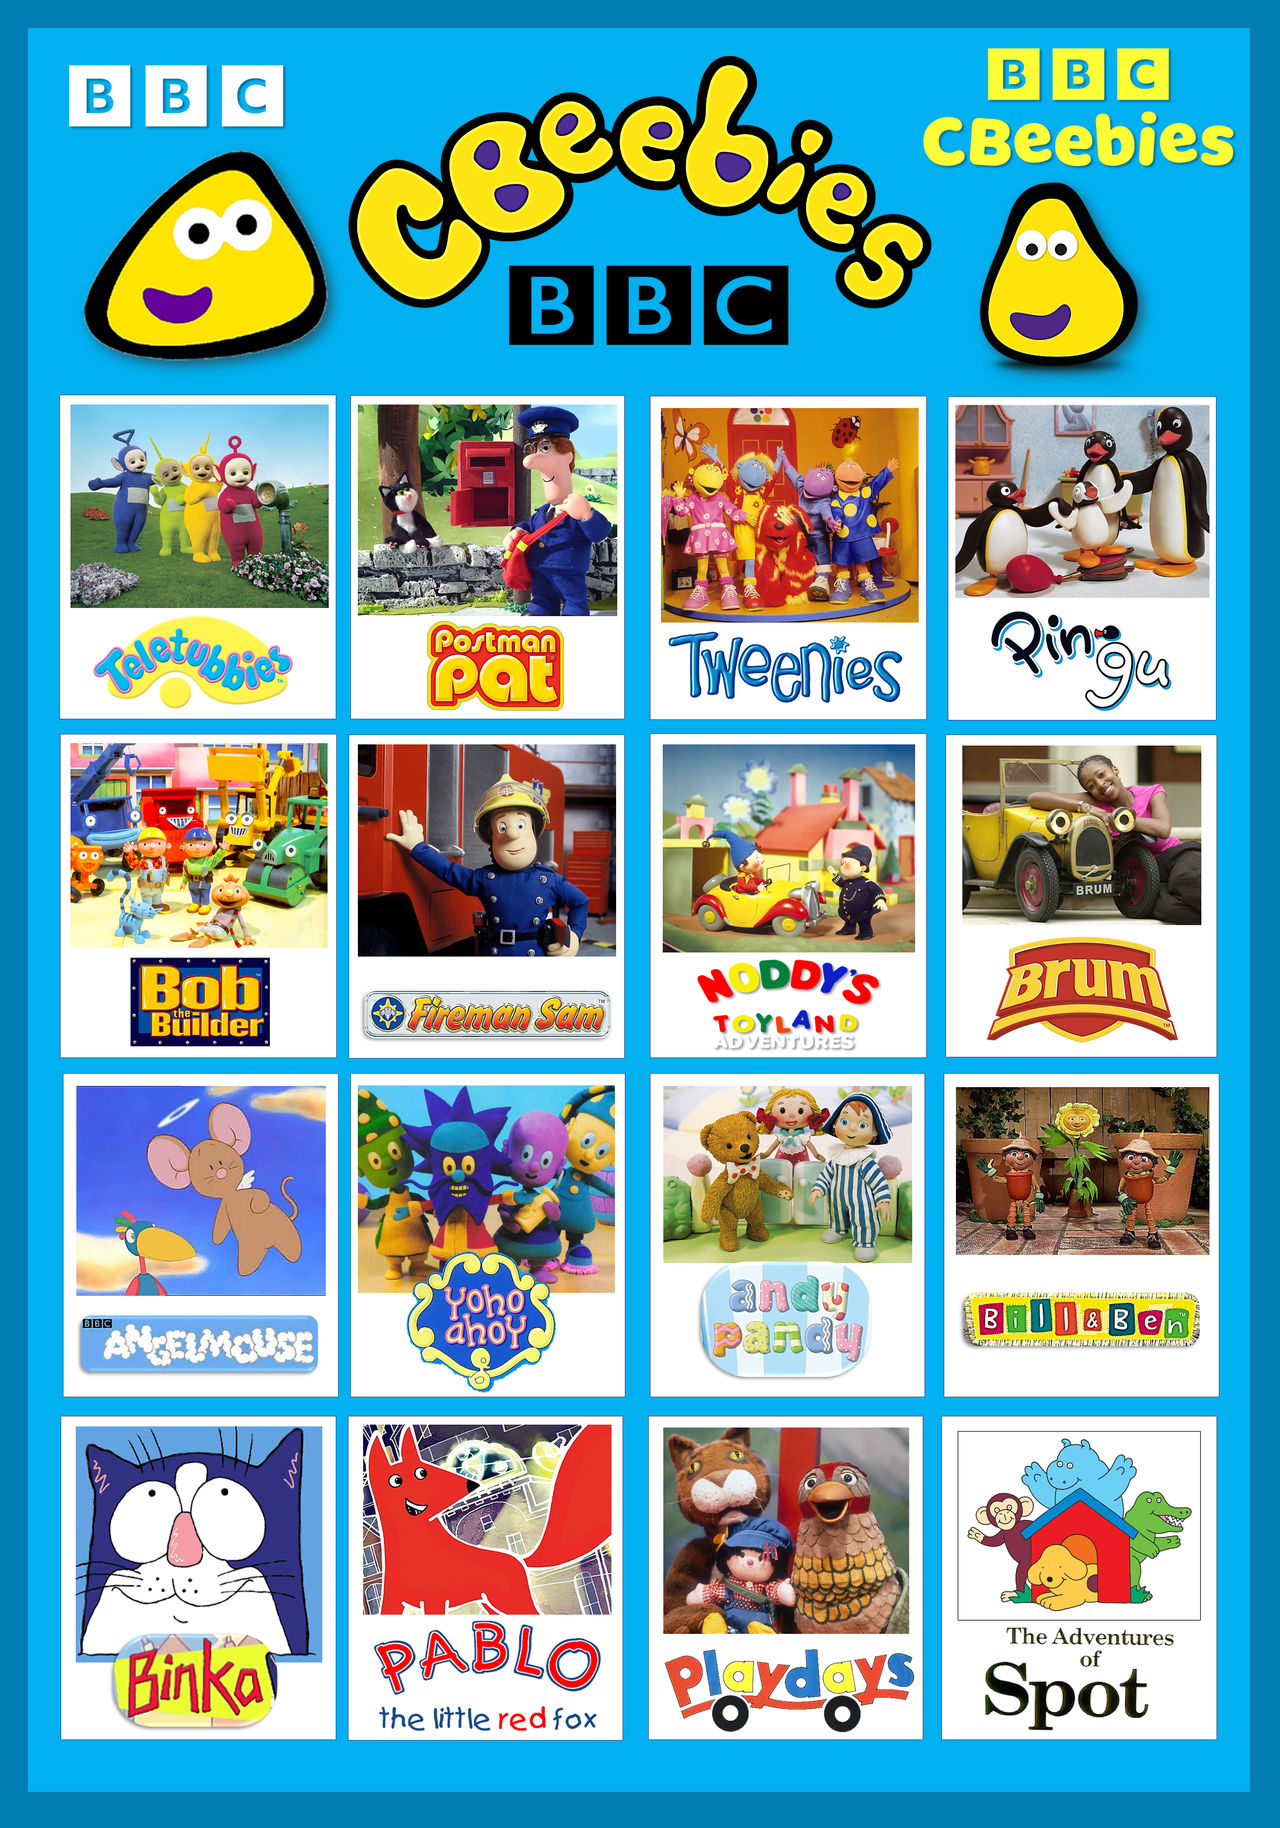 Cbeebies Classic Tv Programmes By Gikesmanners1995 On Deviantart